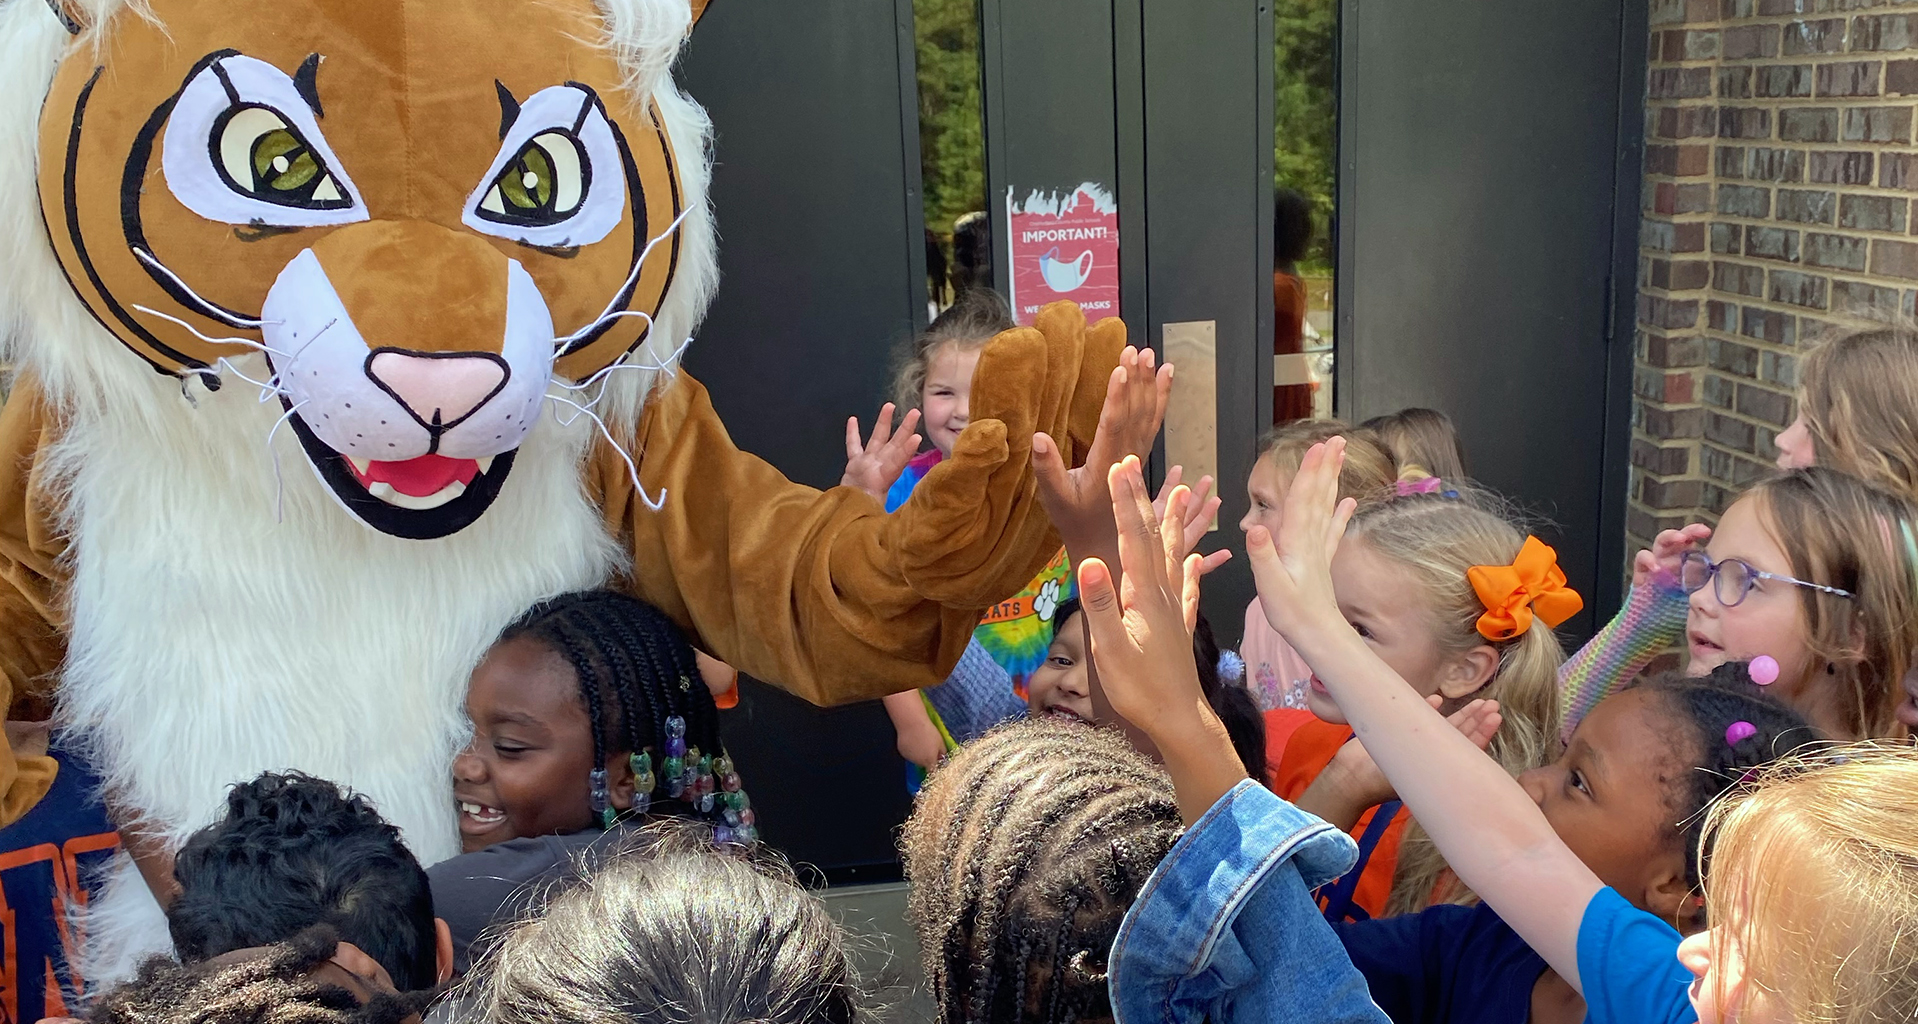 Students high-five the mascot outside.